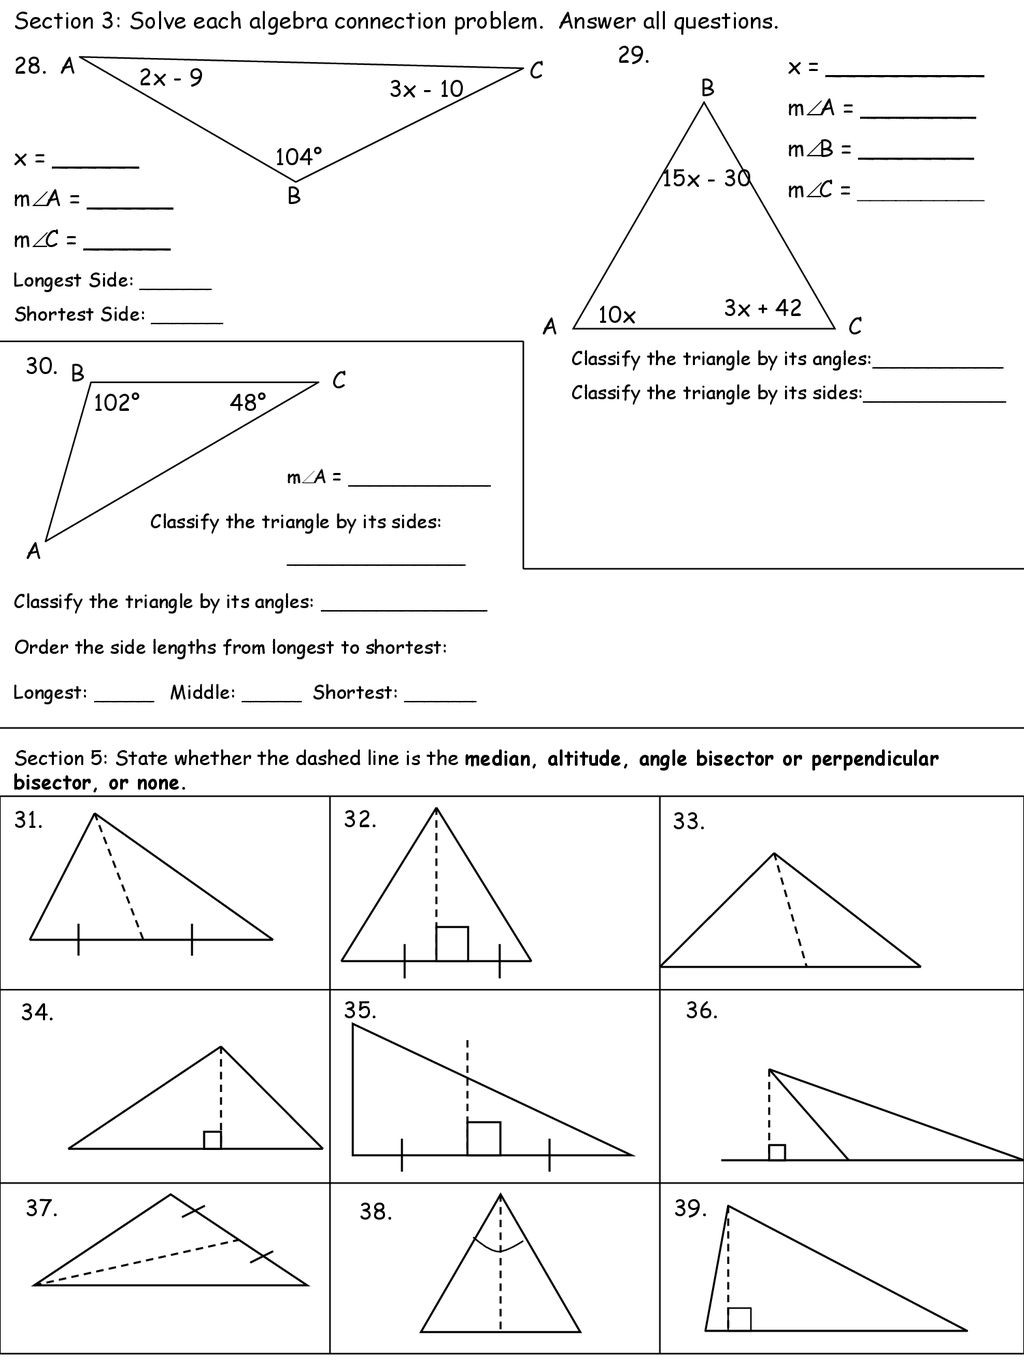 Points Of Concurrency Worksheet Answers Geometry Trig 2 Name Ppt